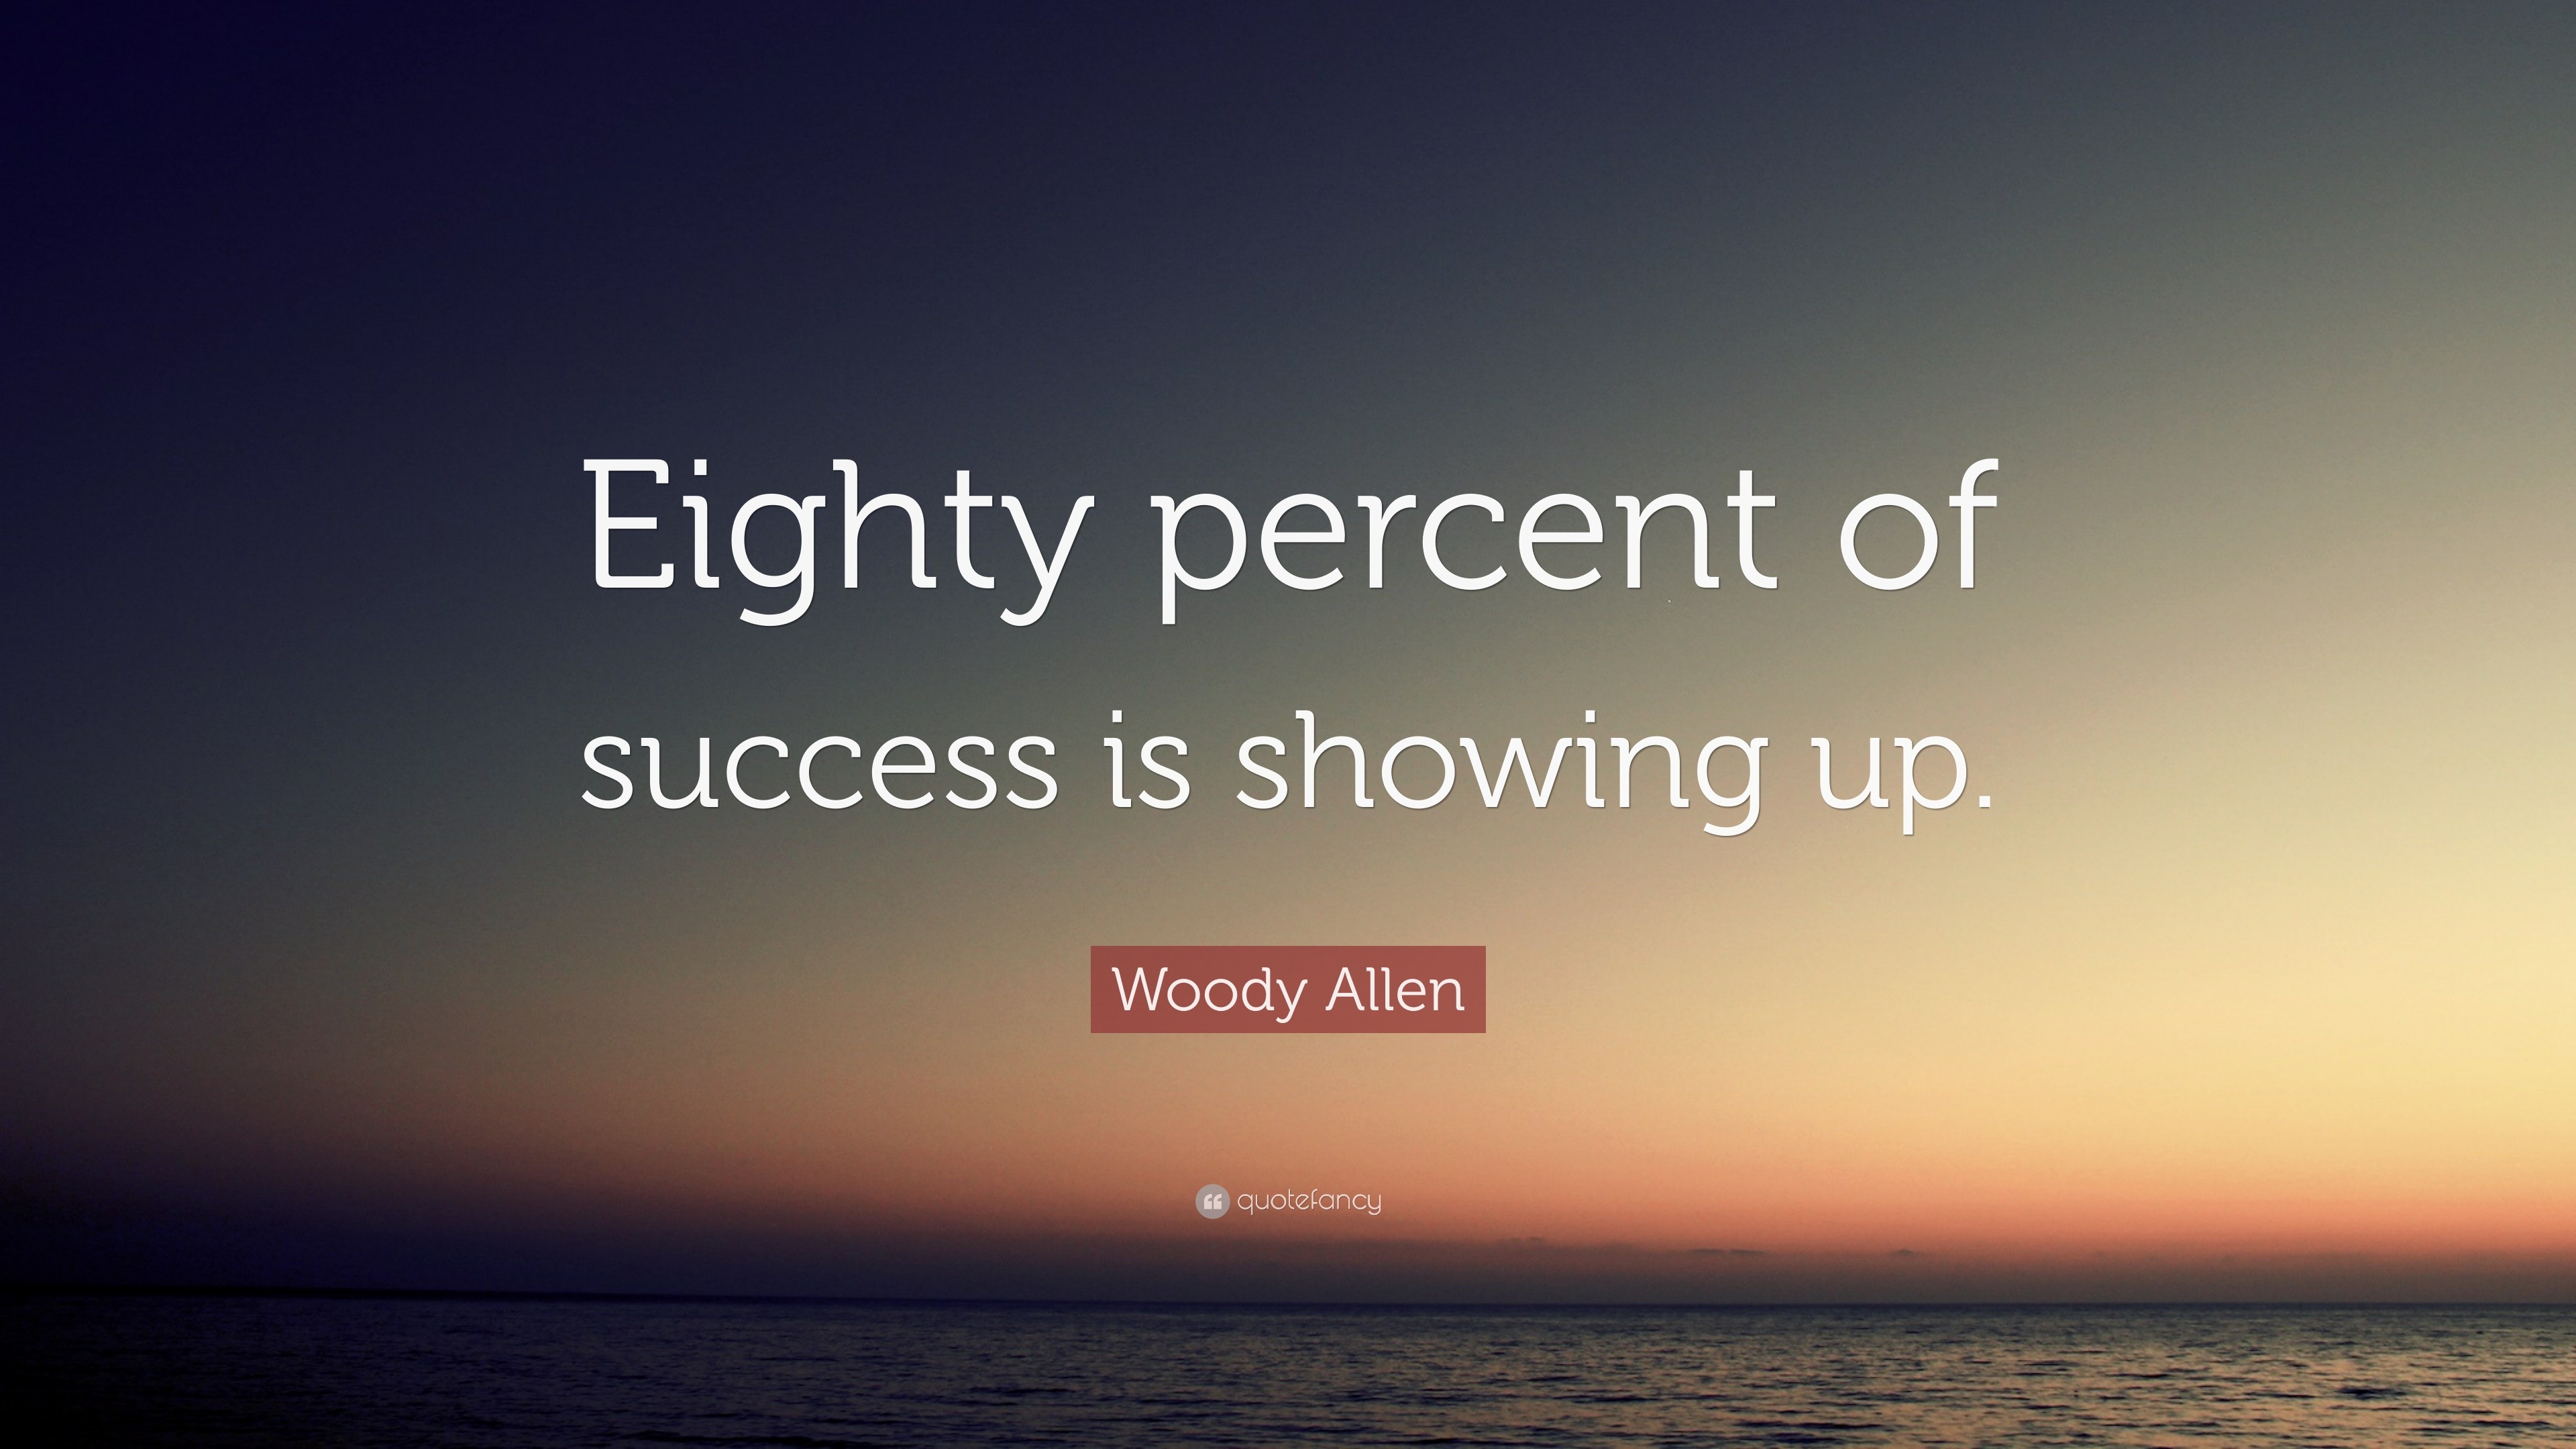 Woody Allen Quote “eighty Percent Of Success Is Showing Up” 23 Wallpapers Quotefancy 9851